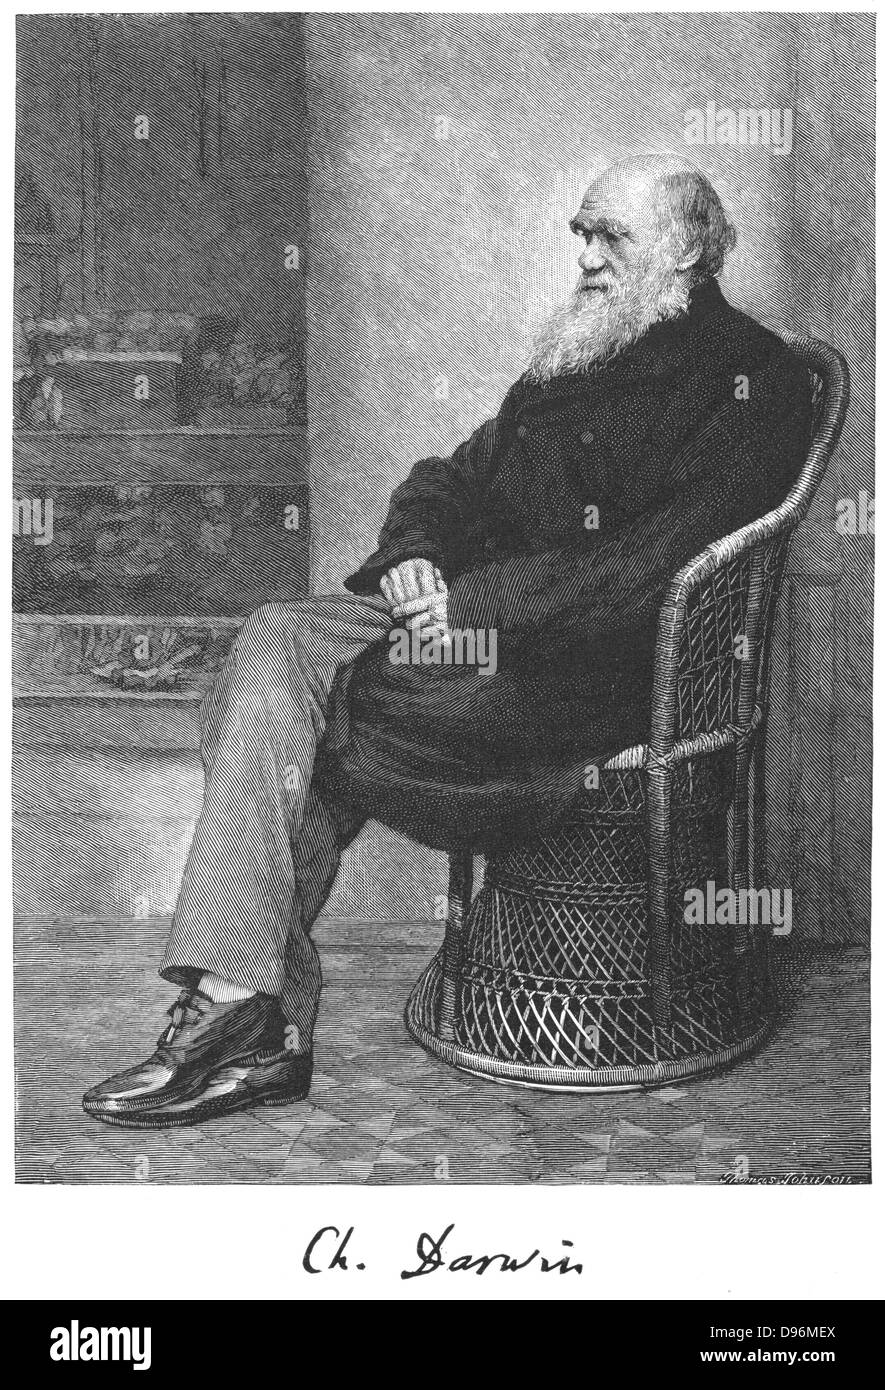 Charles Darwin (1809-1882) Darwin English naturalist. Evolution by Natural Selection. Engraving from 'The Century Magazine', New York, January 1883 Stock Photo